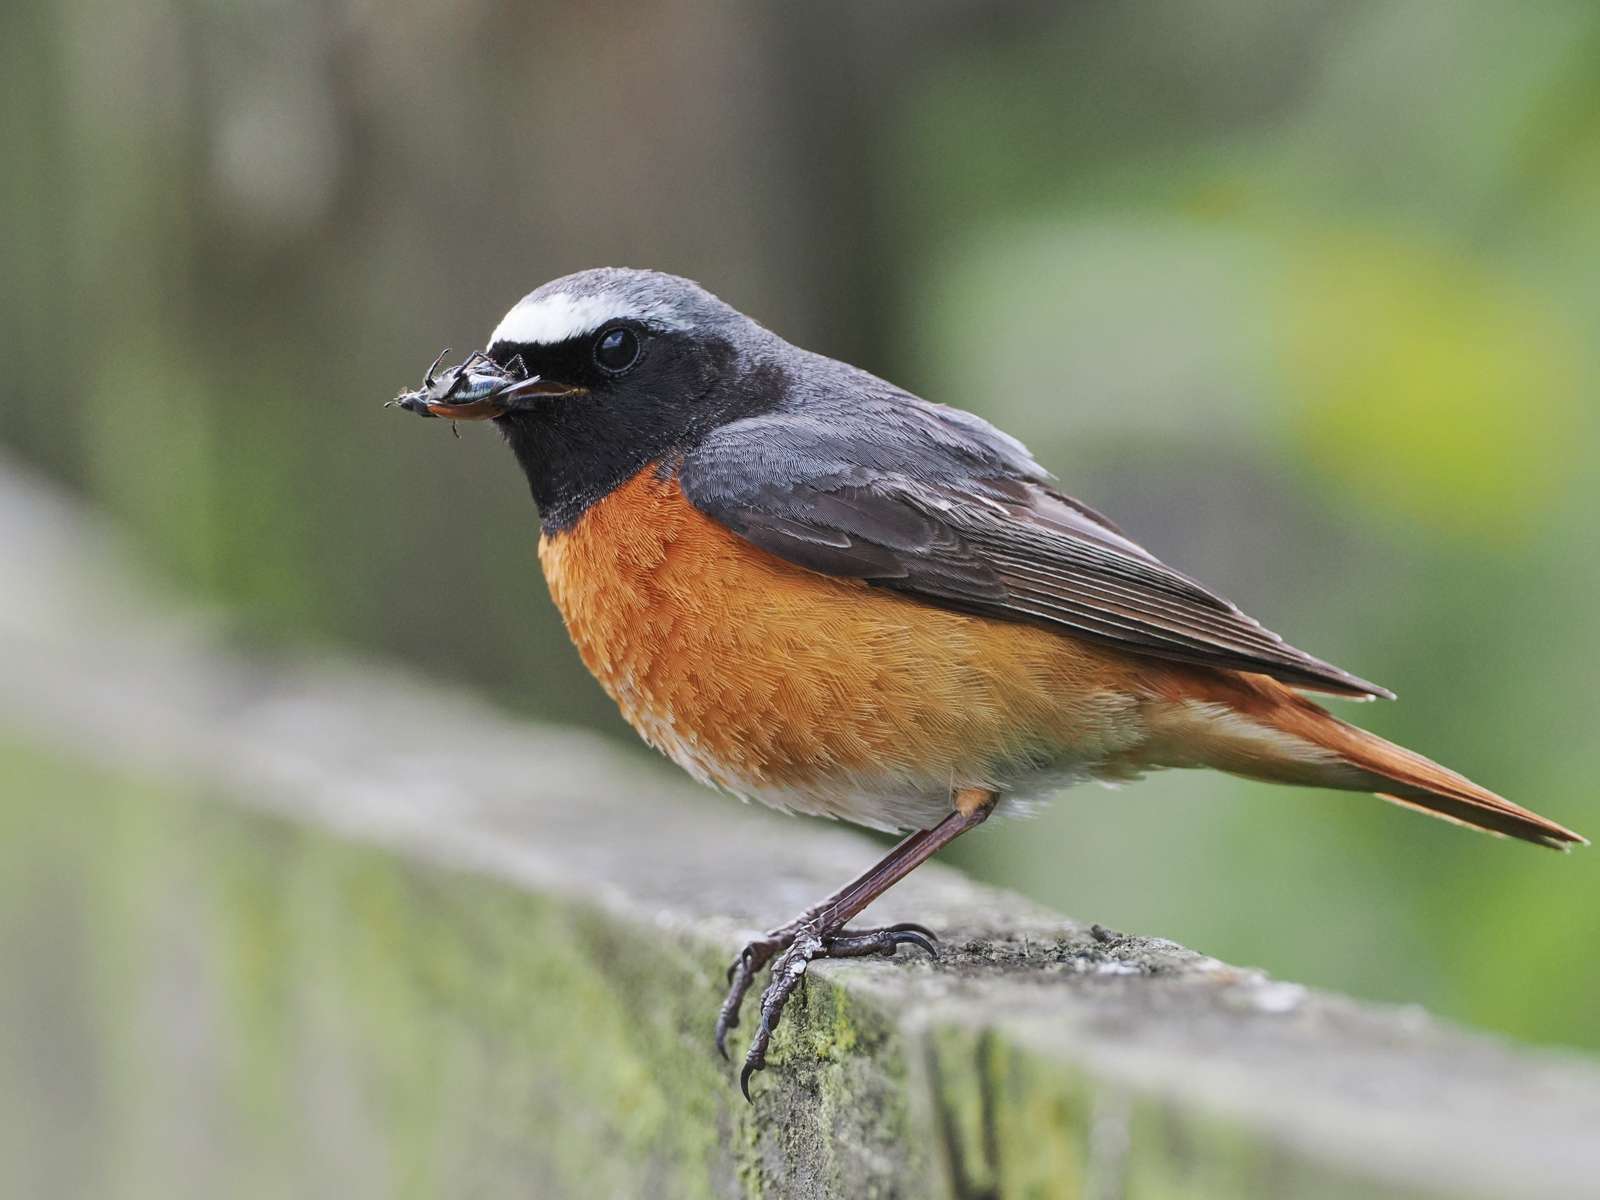 Redstart by Tom Wallis at Challacombe